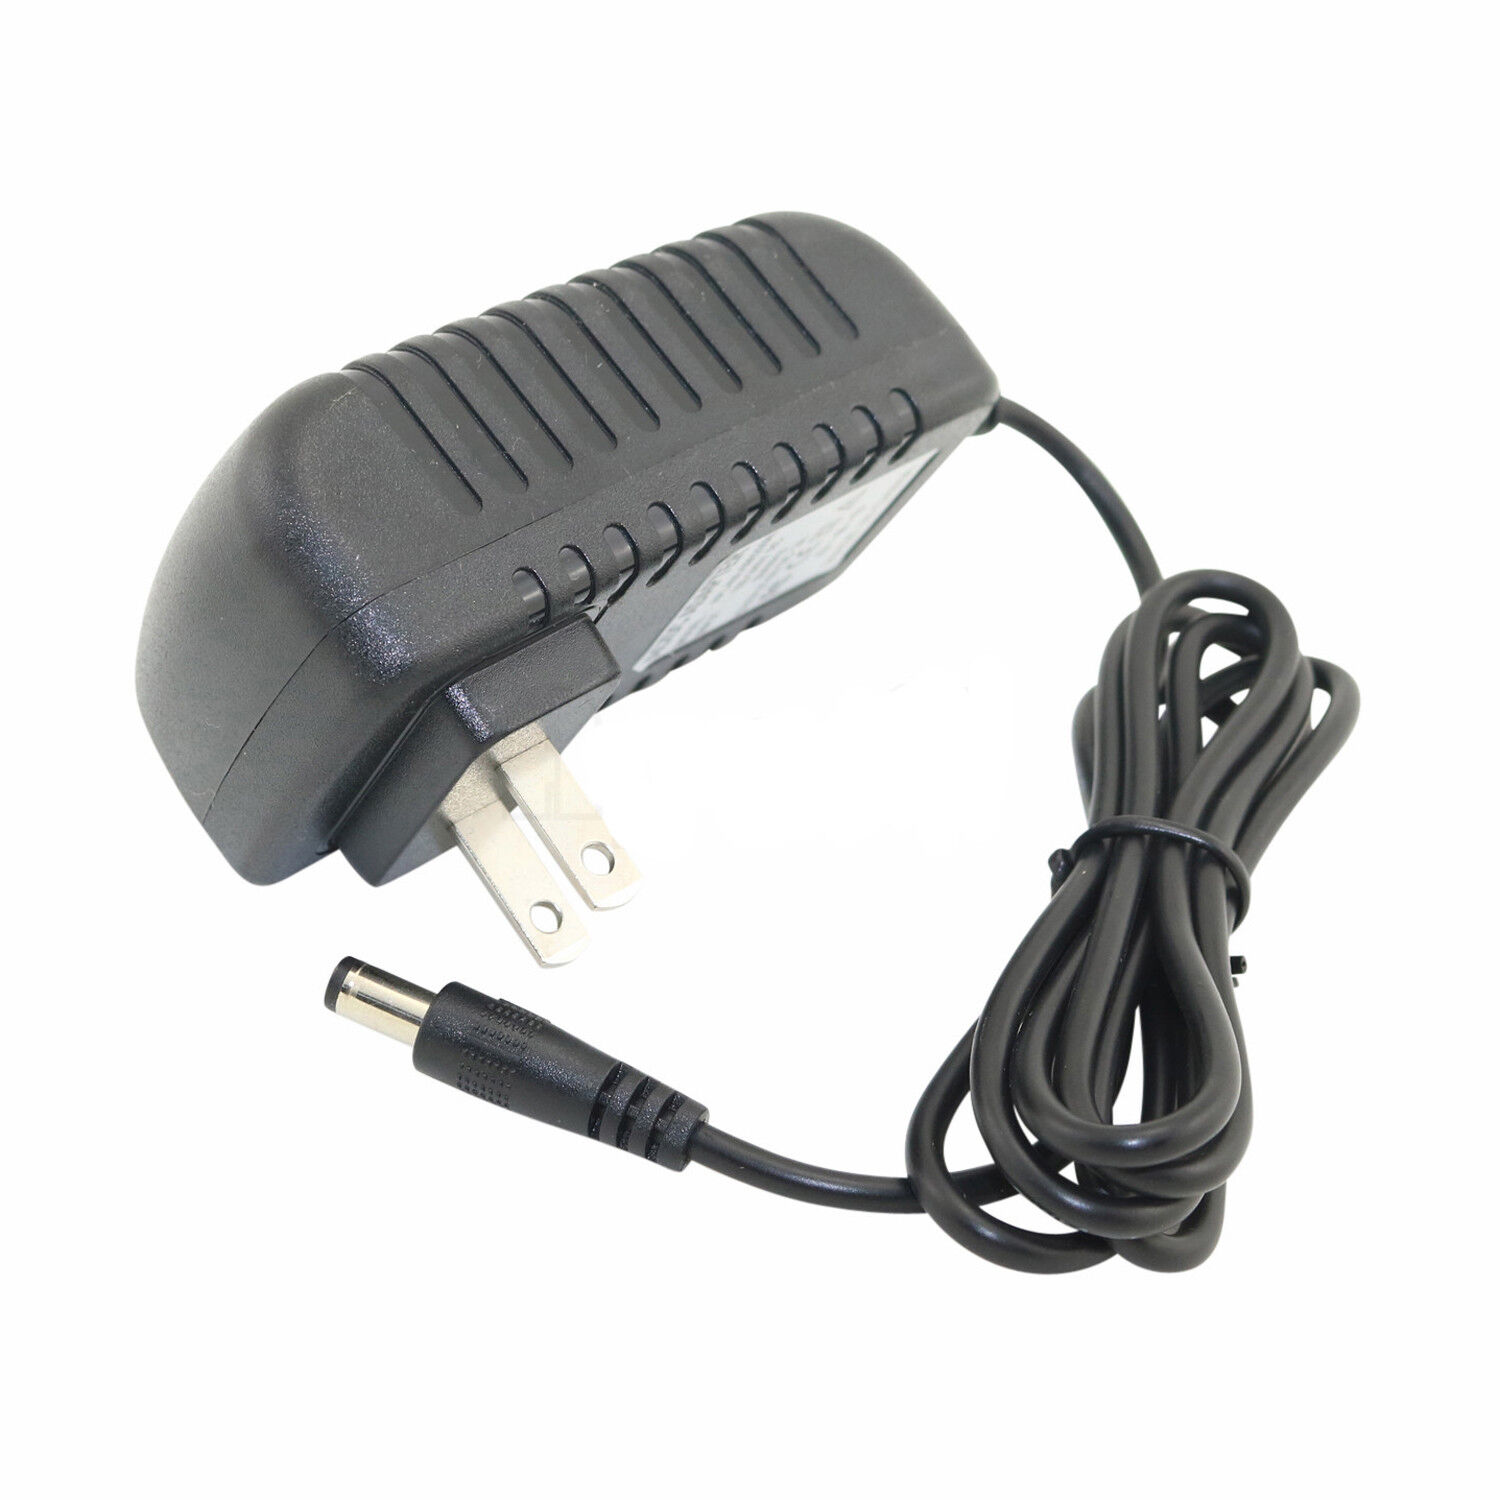 AC Adapter For Getac B300 B300X Fully Rugged Laptop Charger Power Supply Cord Brand Unbranded Bundled Items Power C